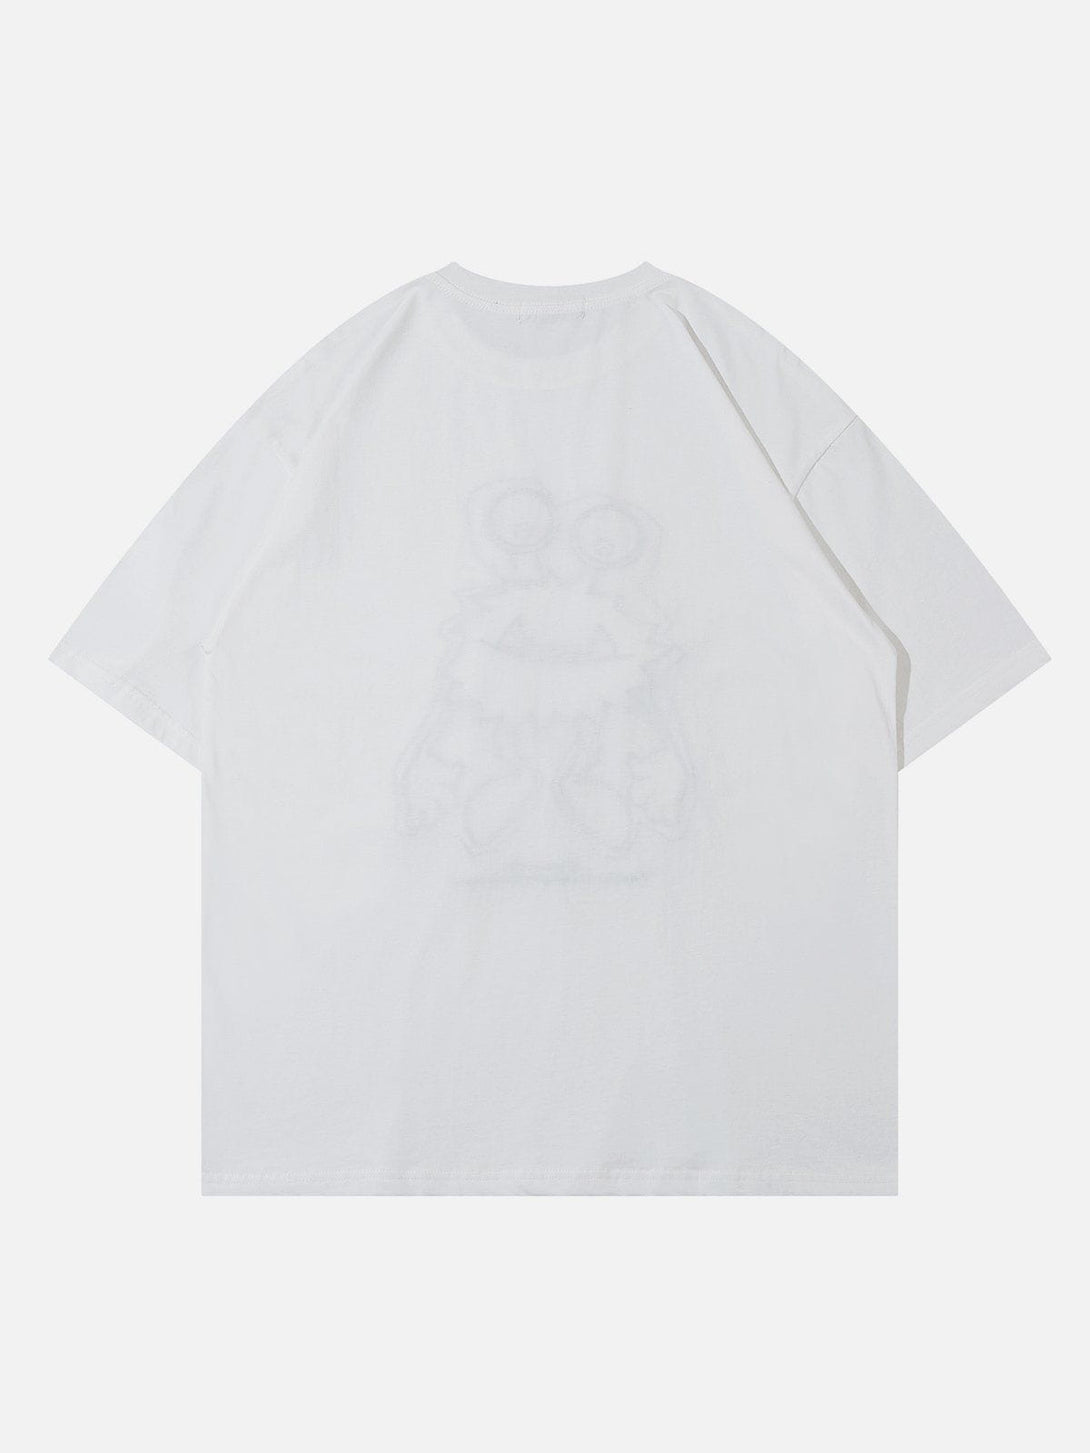 Levefly - Monster Embroidery Print Tee - Streetwear Fashion - levefly.com